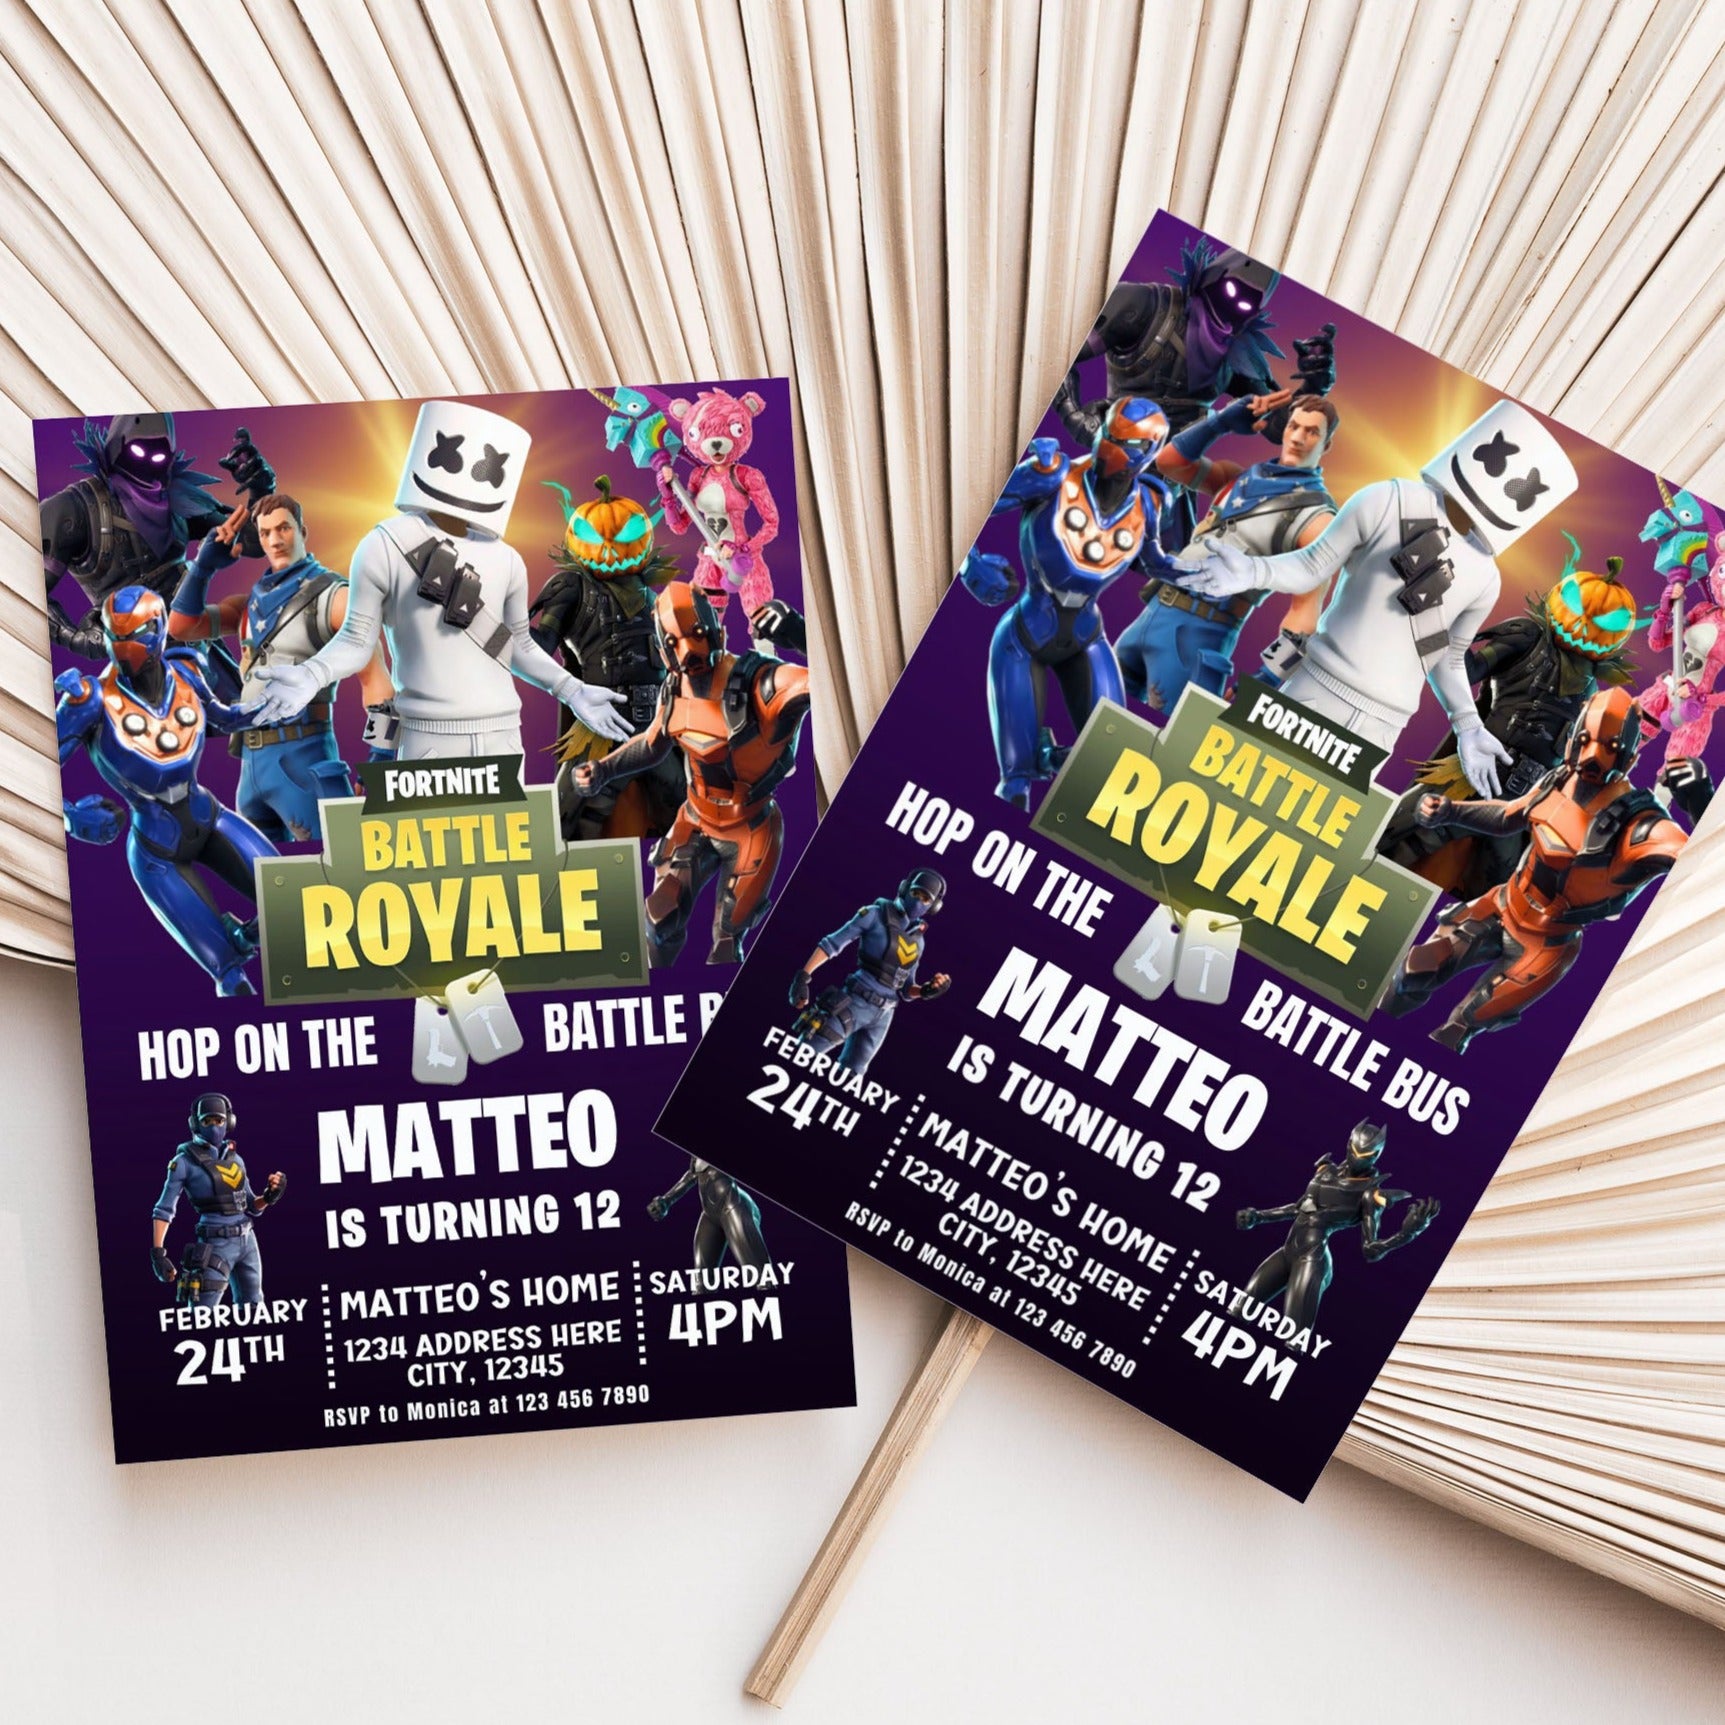 Fortnite birthday invitation template featuring iconic gaming graphics.